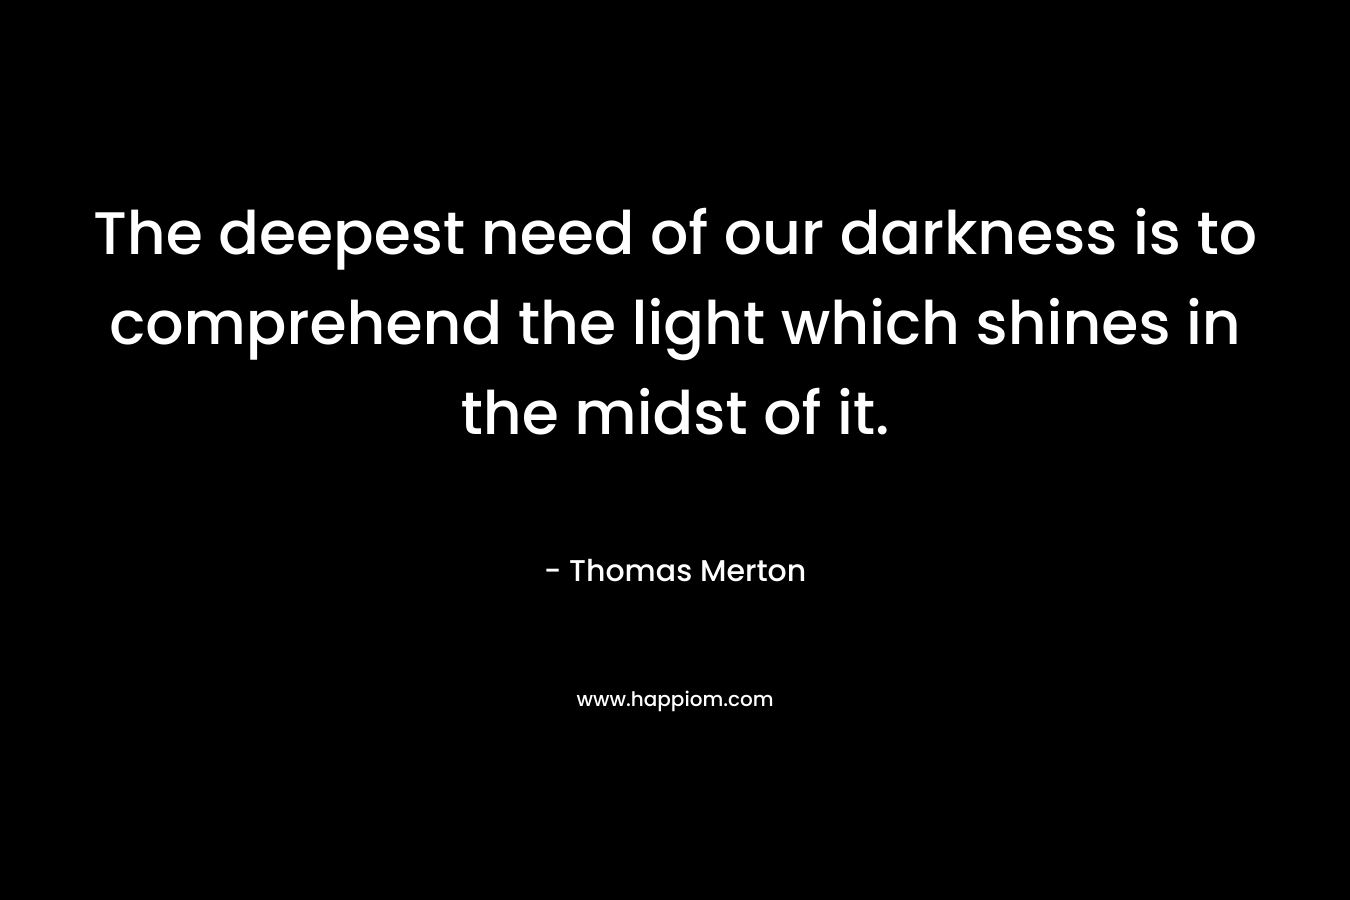 The deepest need of our darkness is to comprehend the light which shines in the midst of it.